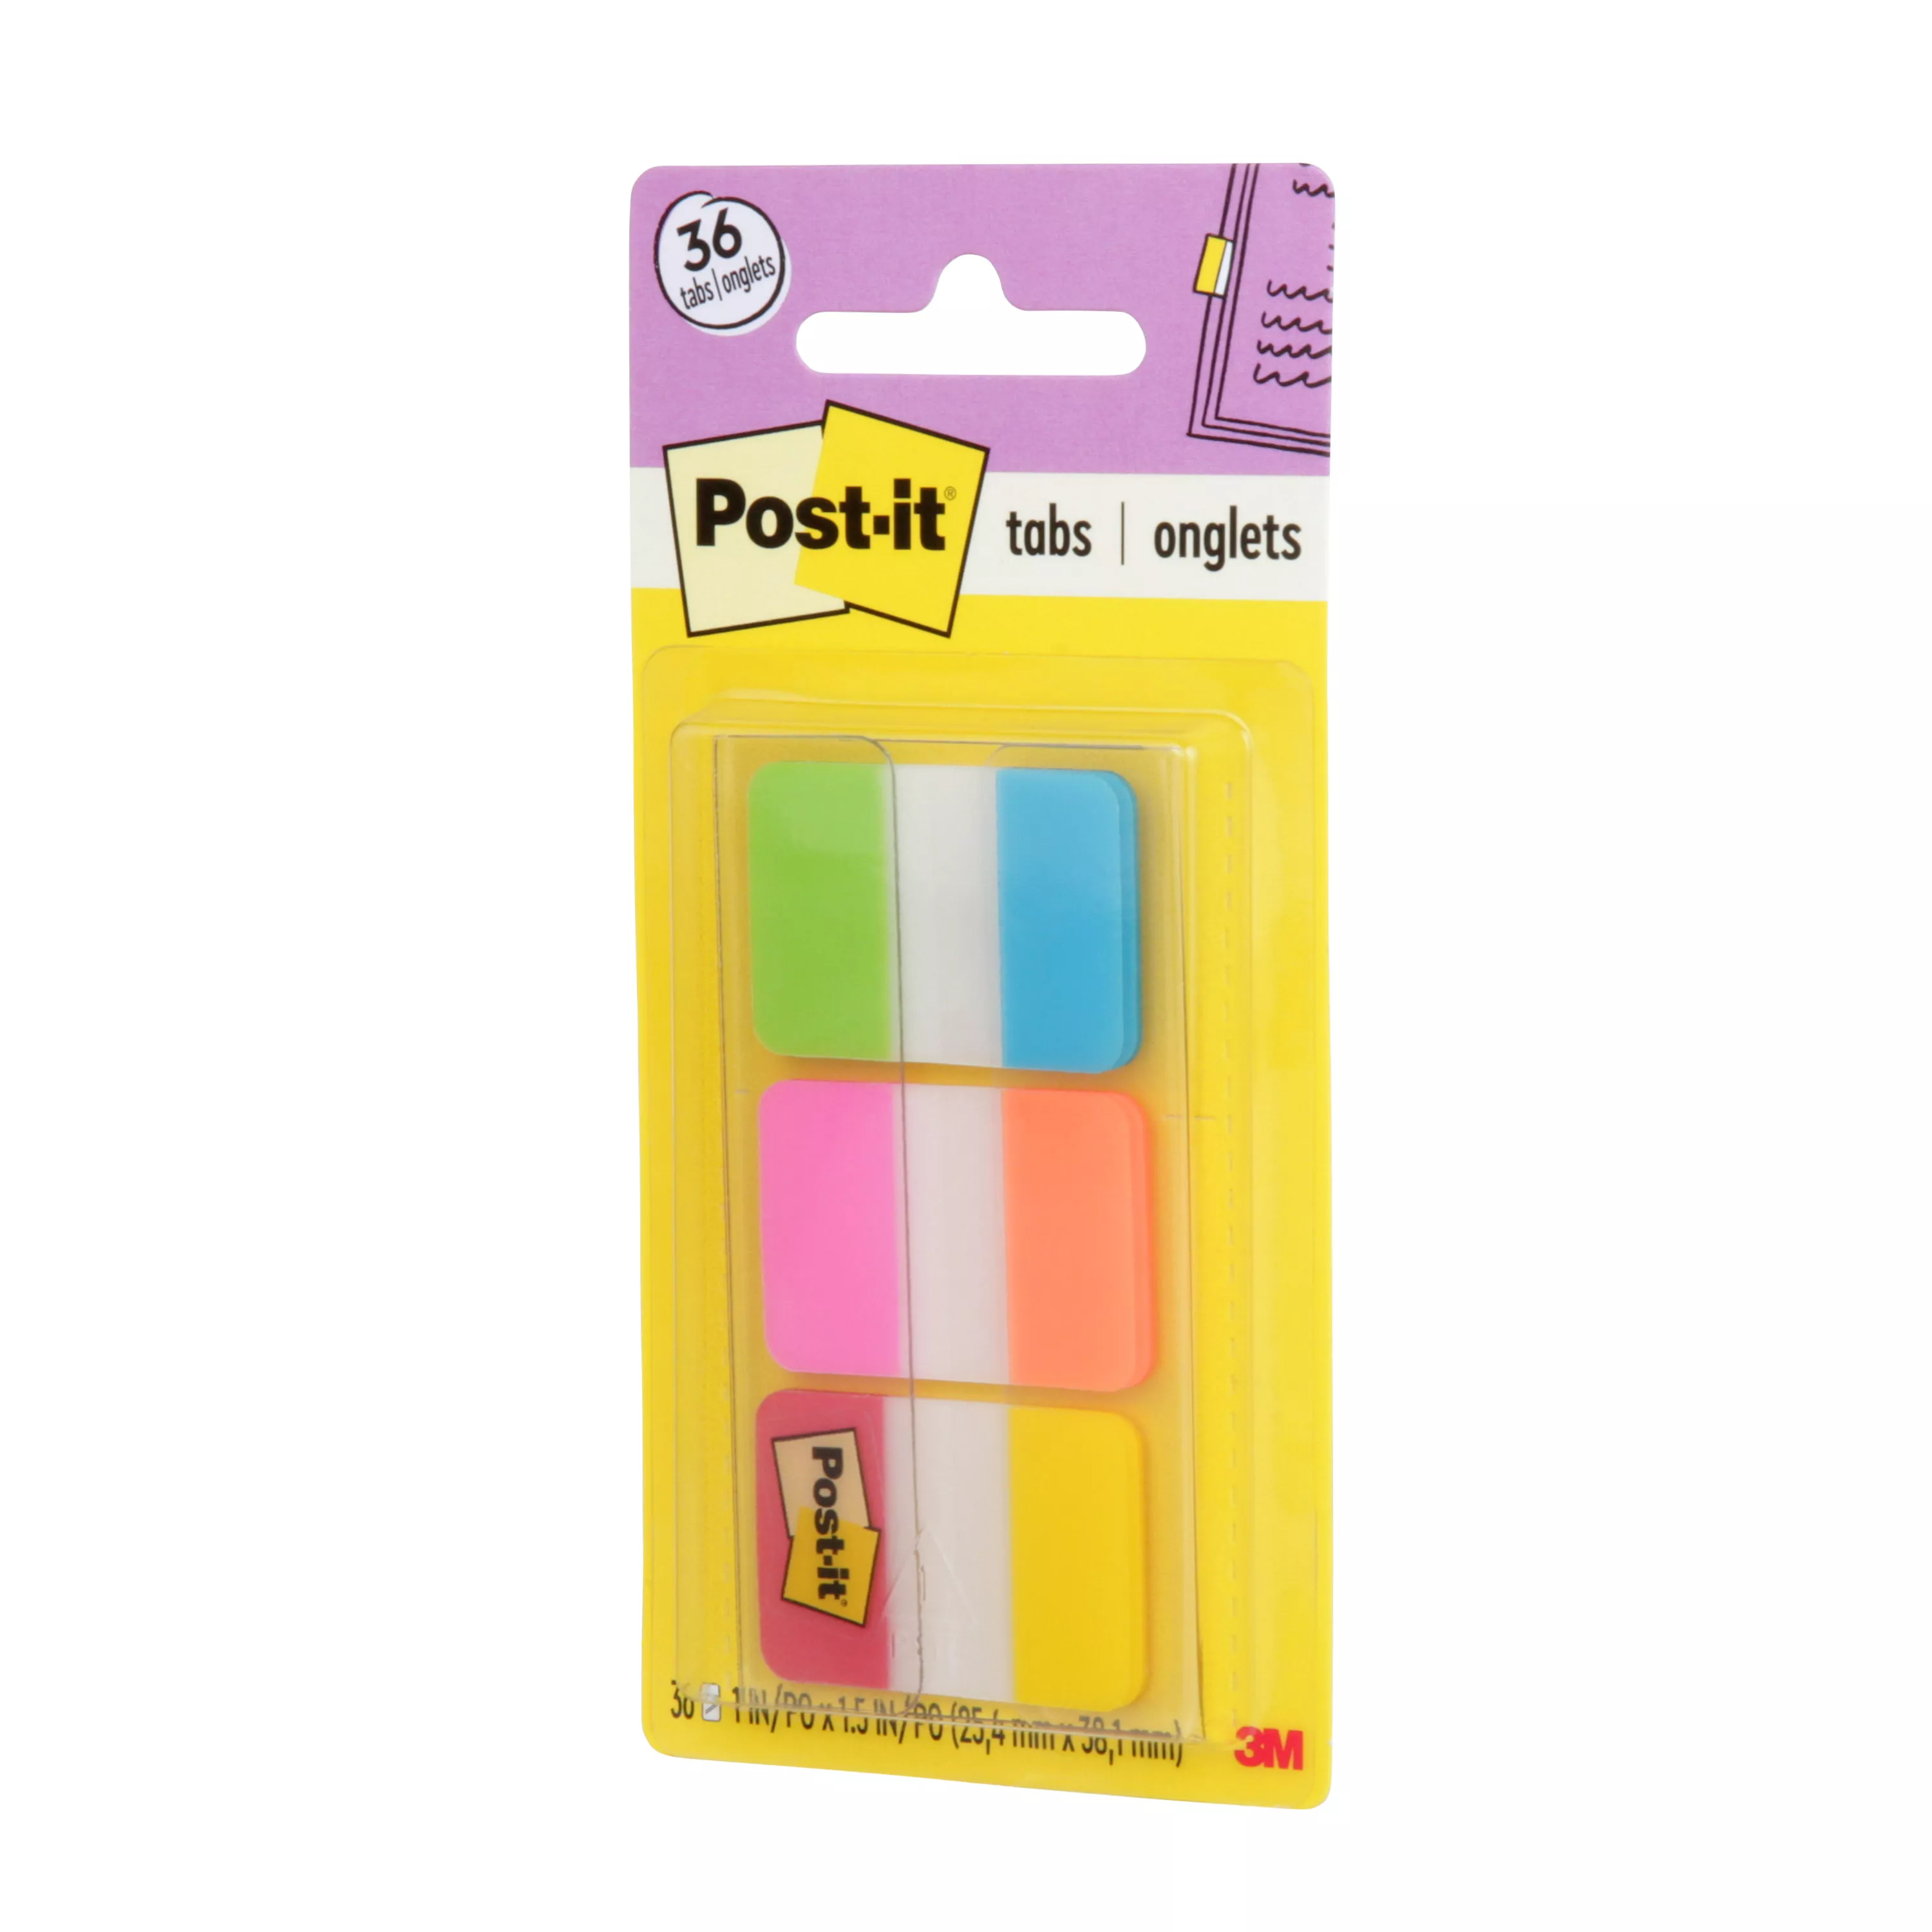 Product Number 686-ALOPRYT | Post-it® Tabs 686-ALOPRYT